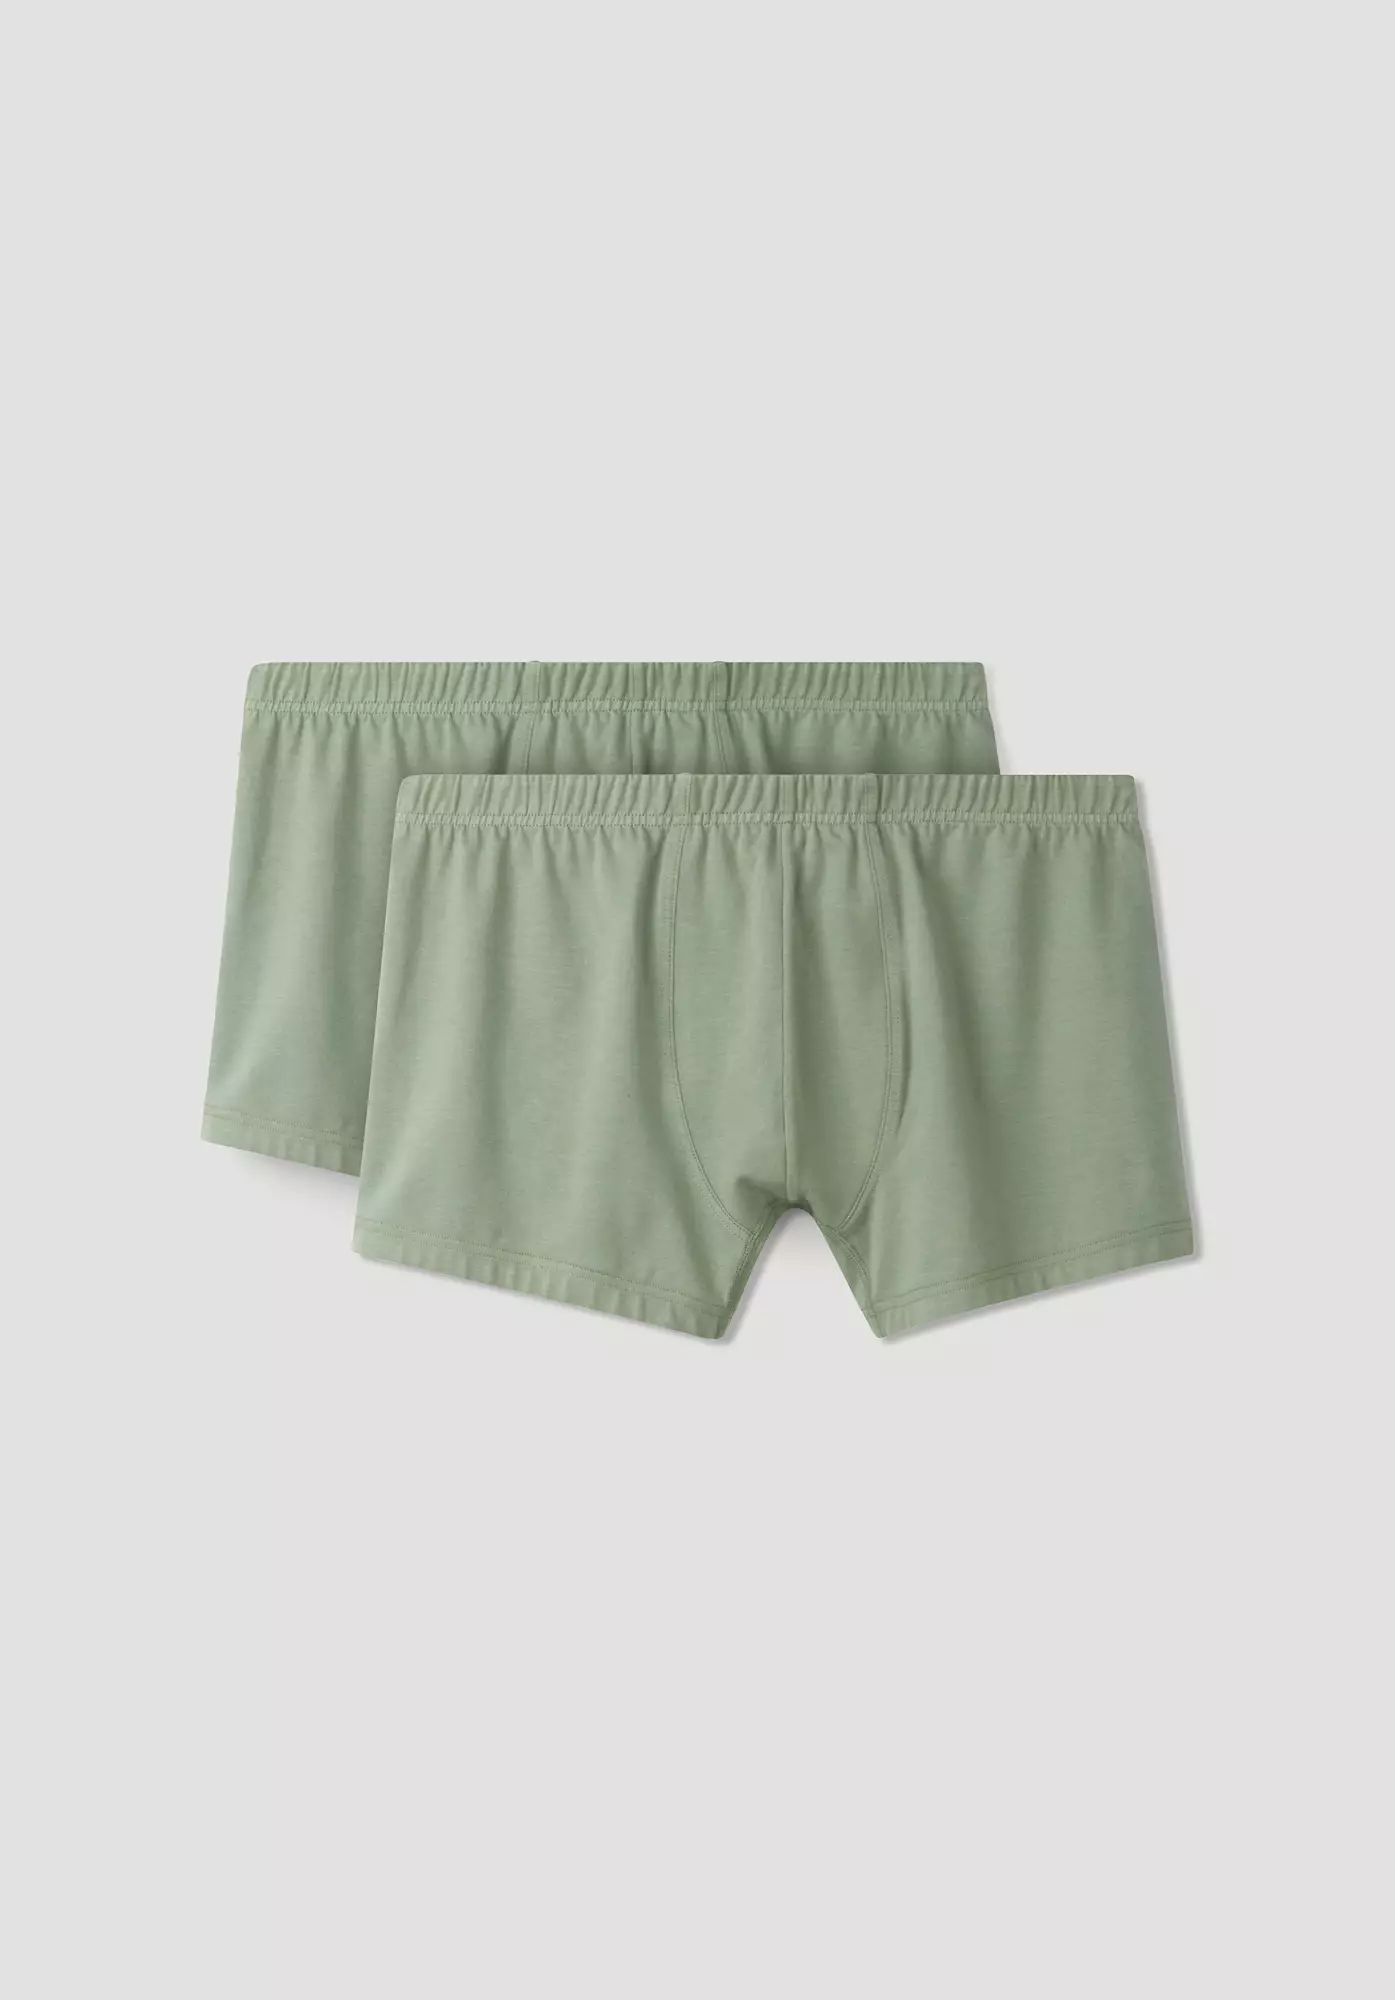 PureLUX pants in a set of 2 made of organic cotton - 3